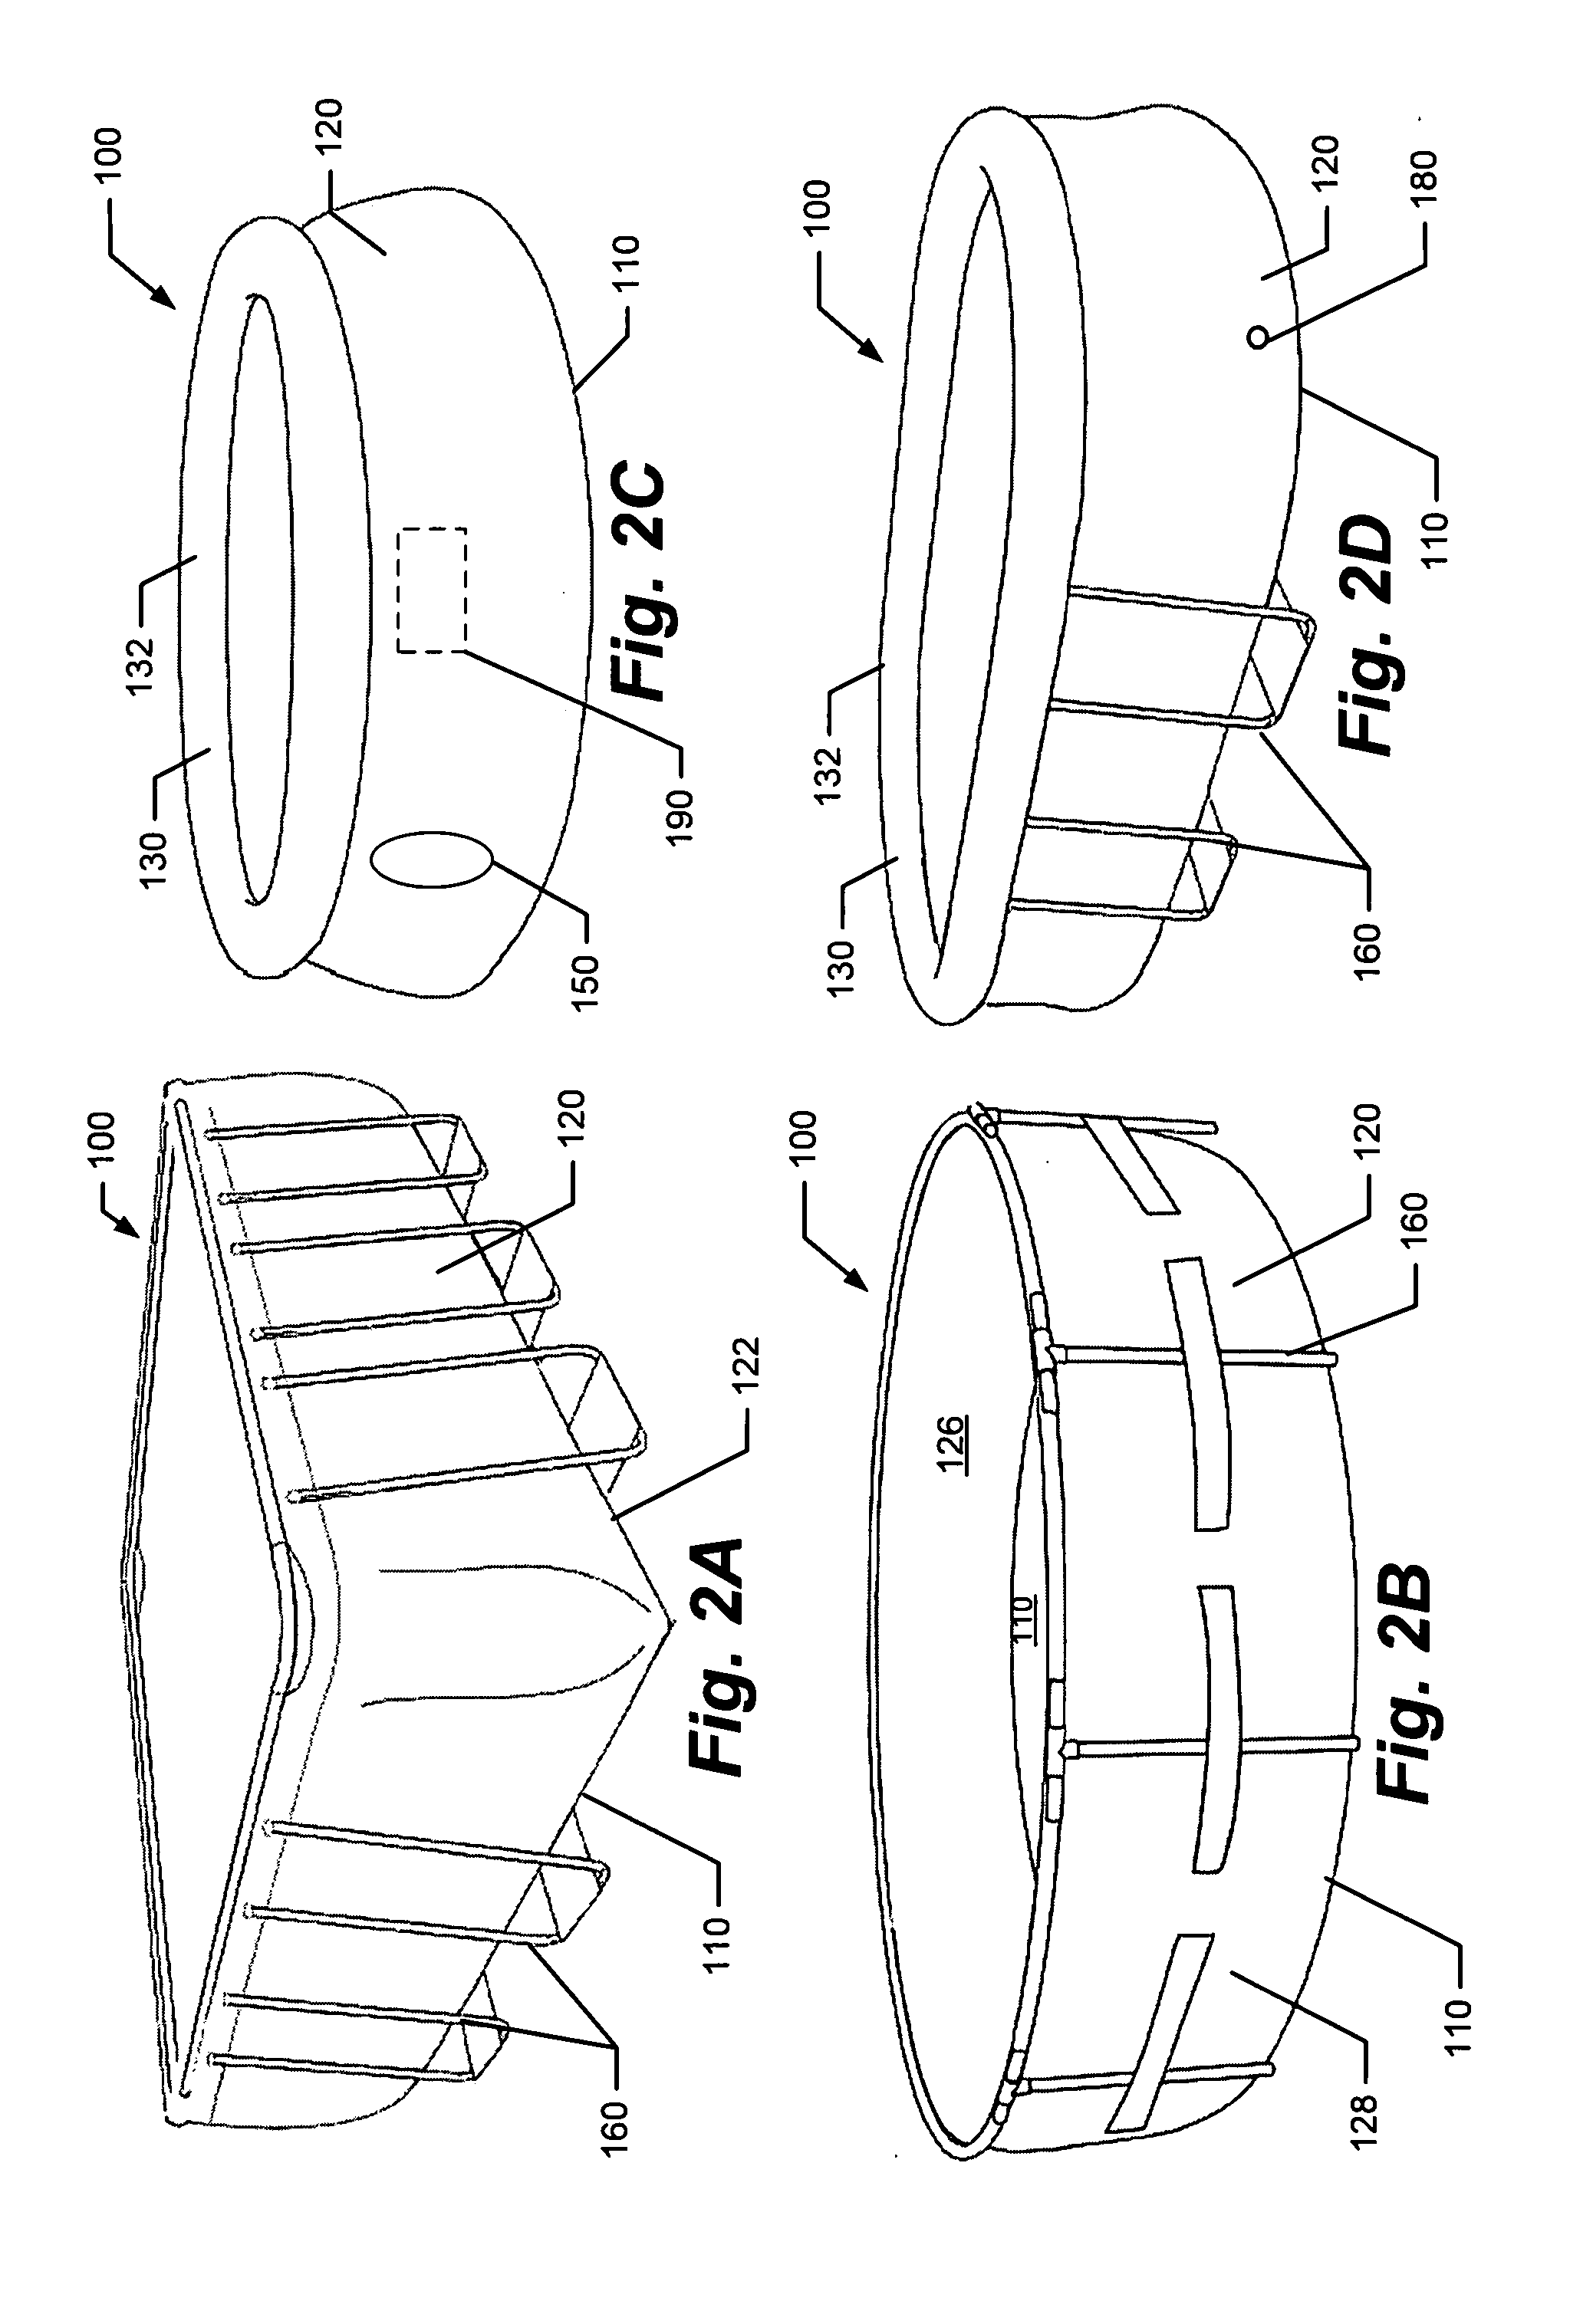 Cleaning system for above-ground container and methods thereof